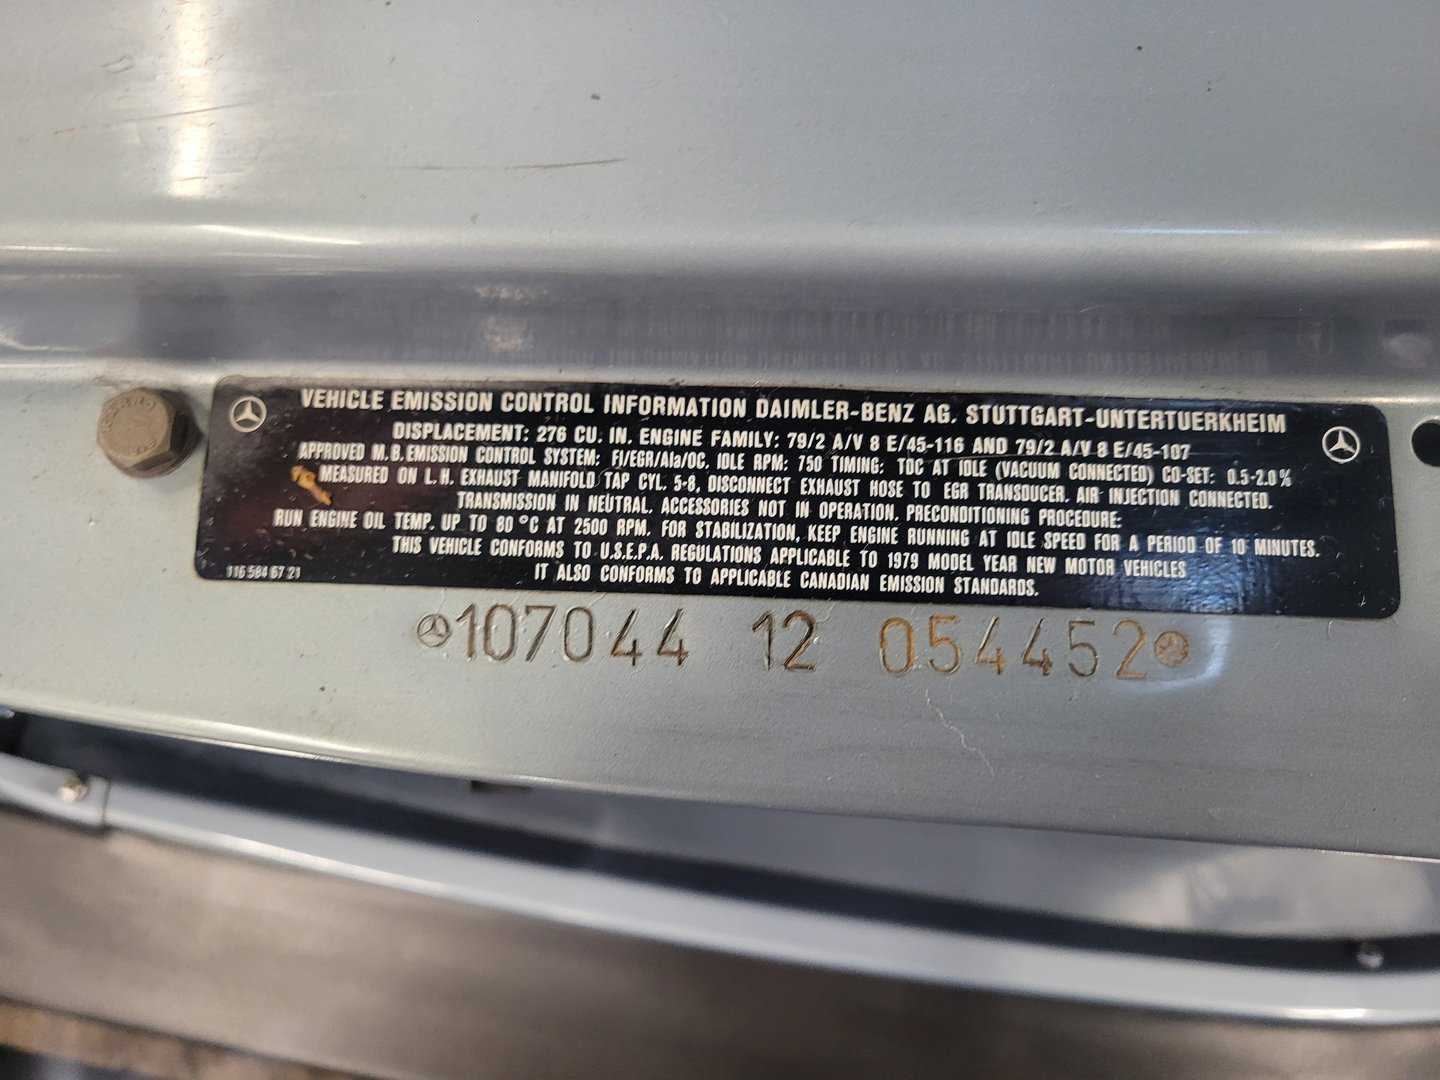 A Close Up Of A Silver Mercedes Benz Machine With A Label On It.